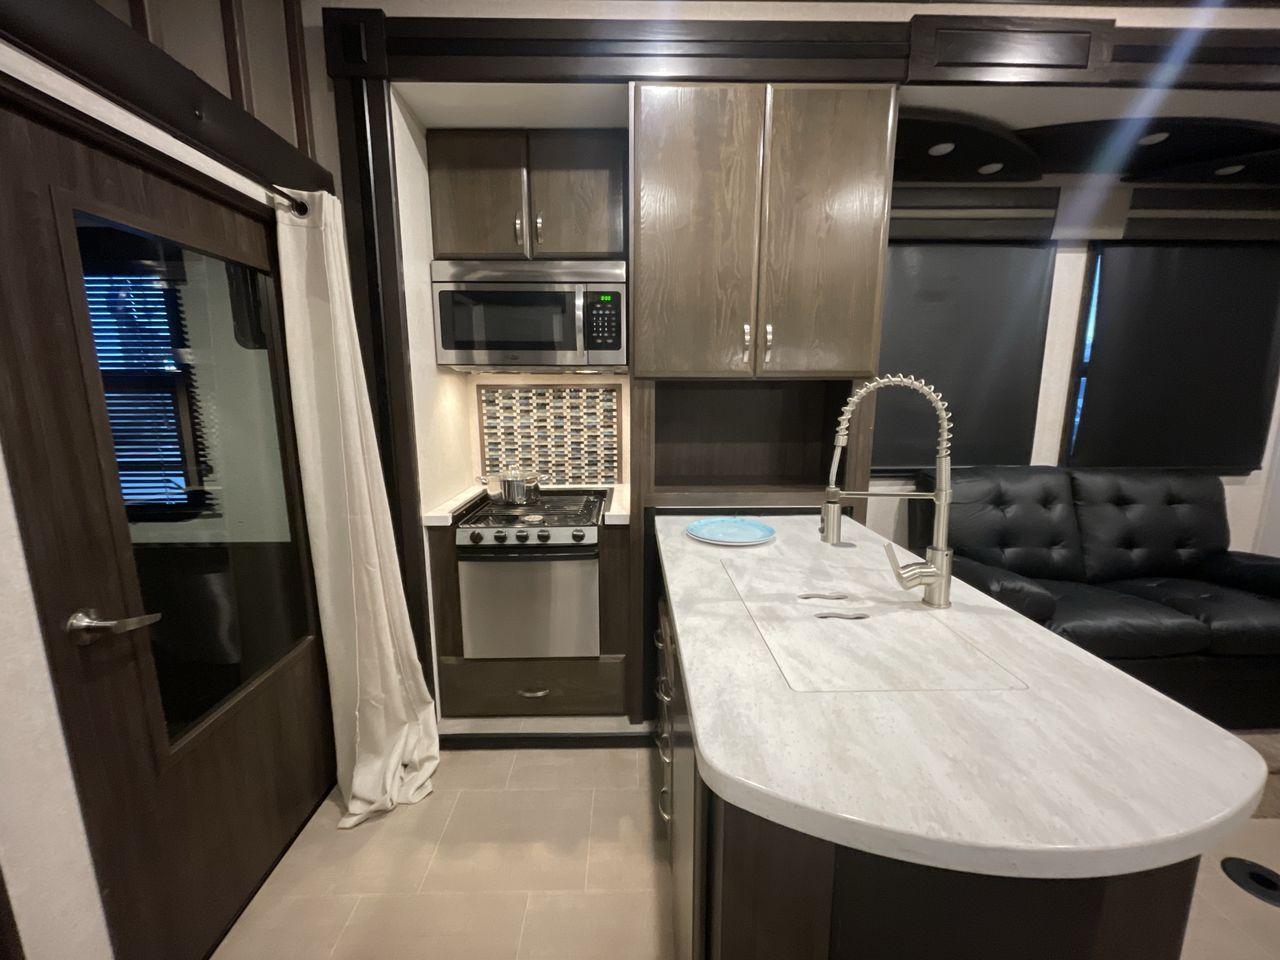 2018 GRAY JAYCO SEISMIC 4250 - (1UJCJSCV5J1) , Length: 44.92 ft. | Dry Weight: 15,570 lbs. | Gross Weight: 20,000 lbs. | Slides: 3 transmission, located at 4319 N Main St, Cleburne, TX, 76033, (817) 678-5133, 32.385960, -97.391212 - Set out to the great outdoors in this 2018 Jayco Seismic 4250 and enjoy all the amenities it has to offer! This toy hauler measures just a bit under 45 ft. in length and 13.32 ft. in height, providing great space and comfort. It has a dry weight of 15,570 lbs. and a GVWR of 20,000 lbs. It also comes - Photo #10